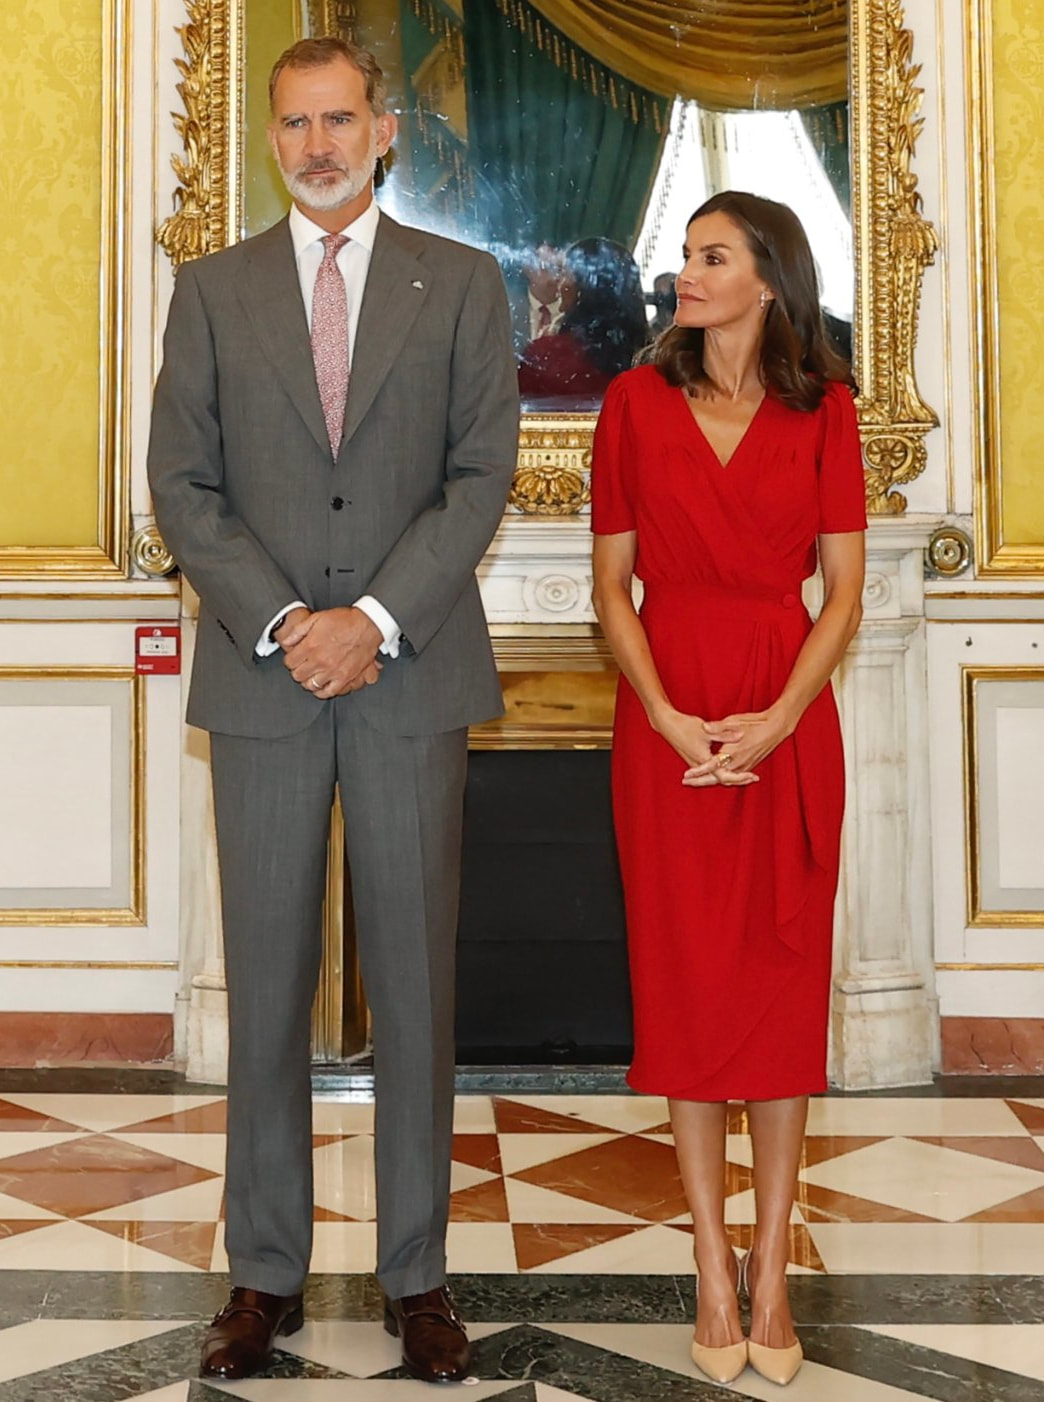 King Felipe VI and Queen of Spain attend the annual meeting of the Board of Trustees of the Cervantes Institute at the Royal Palace of Aranjuez, Madrid on 4 October 2022